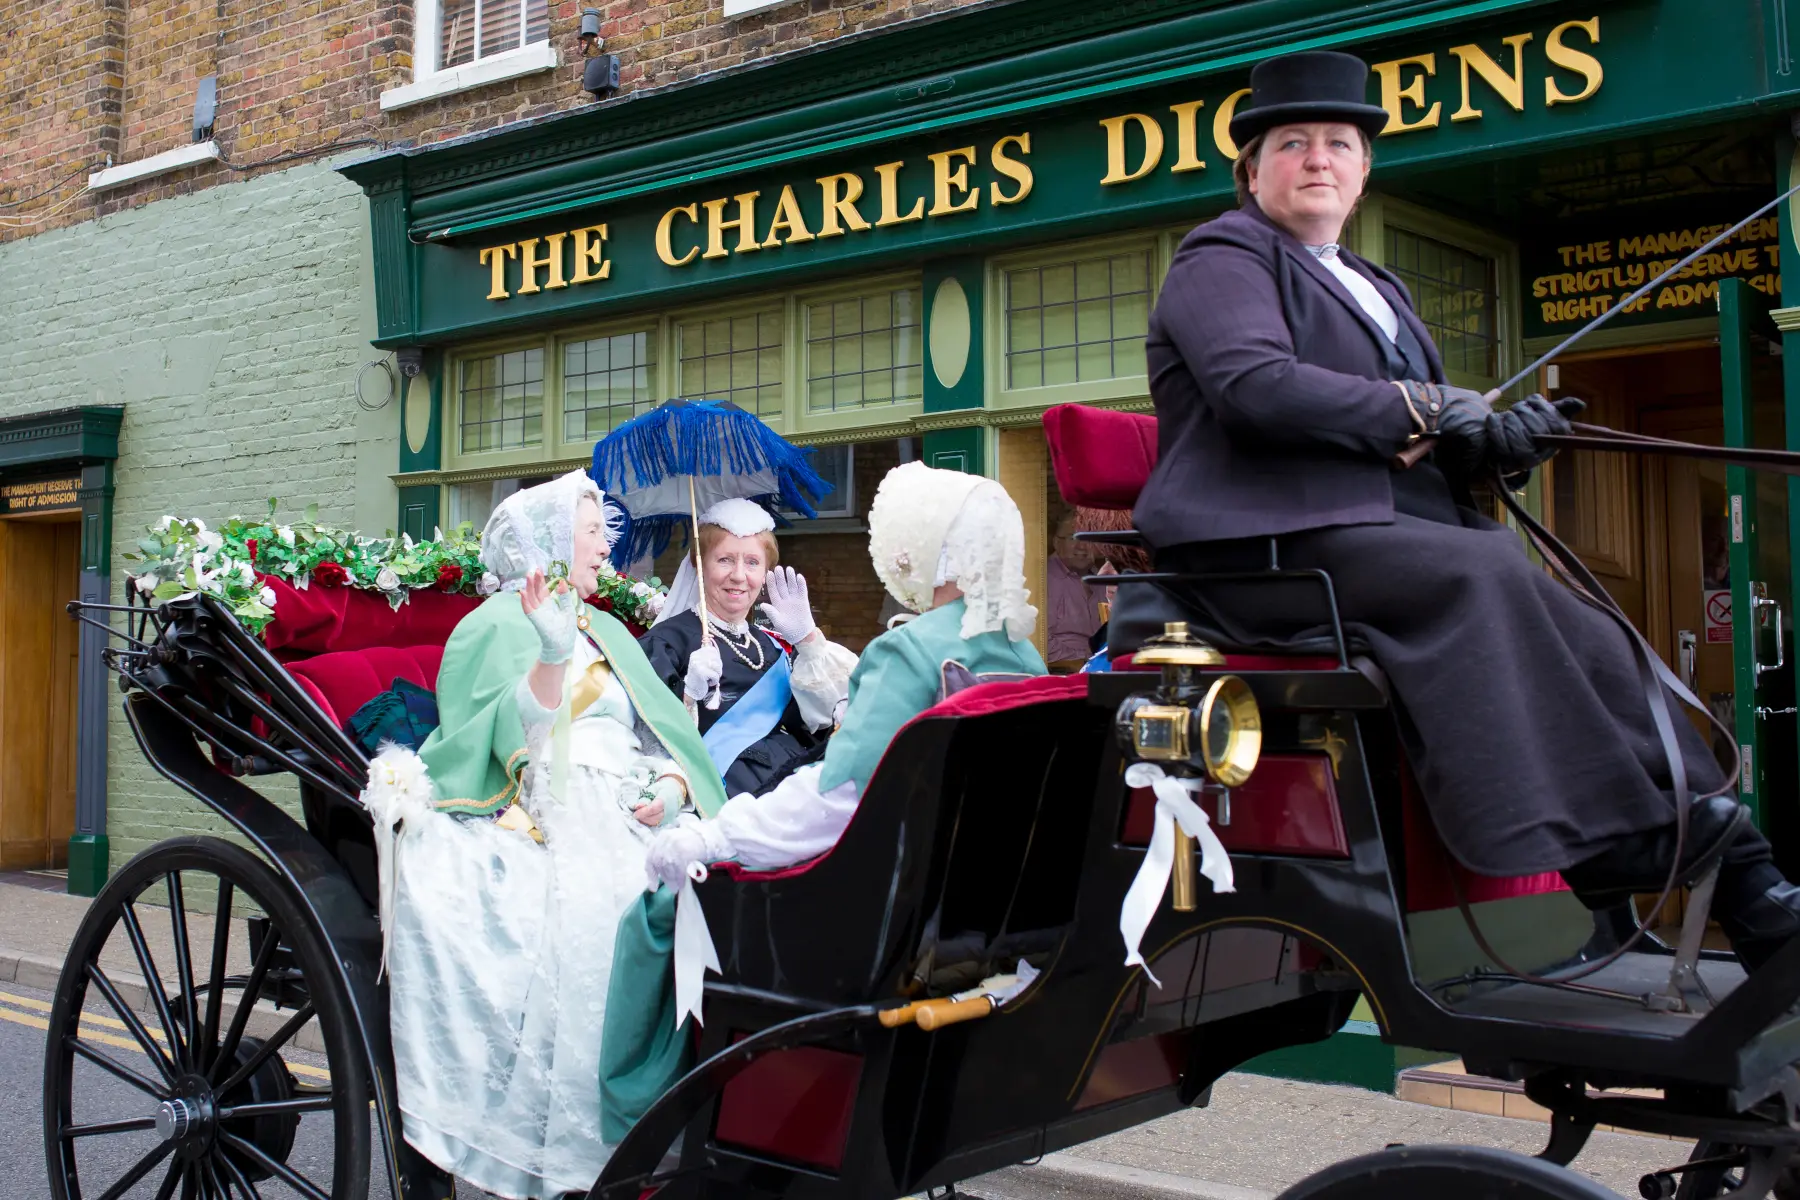 Broadstairs Dickens Festival, credit Tourism @ Thanet District Council